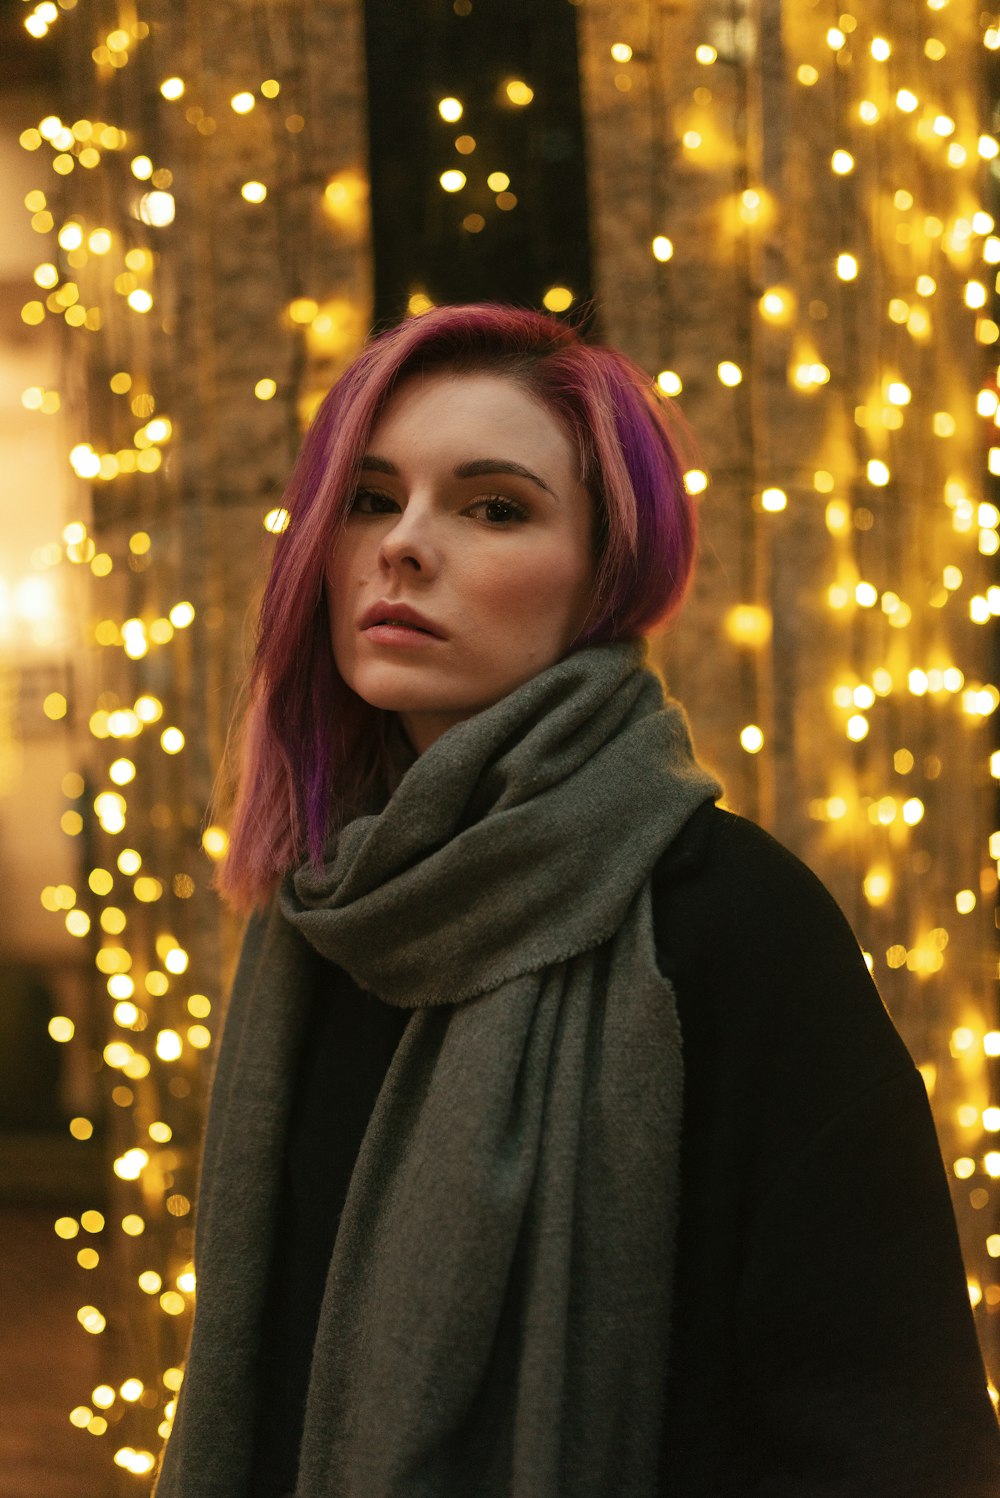 woman in black scarf standing near yellow lights